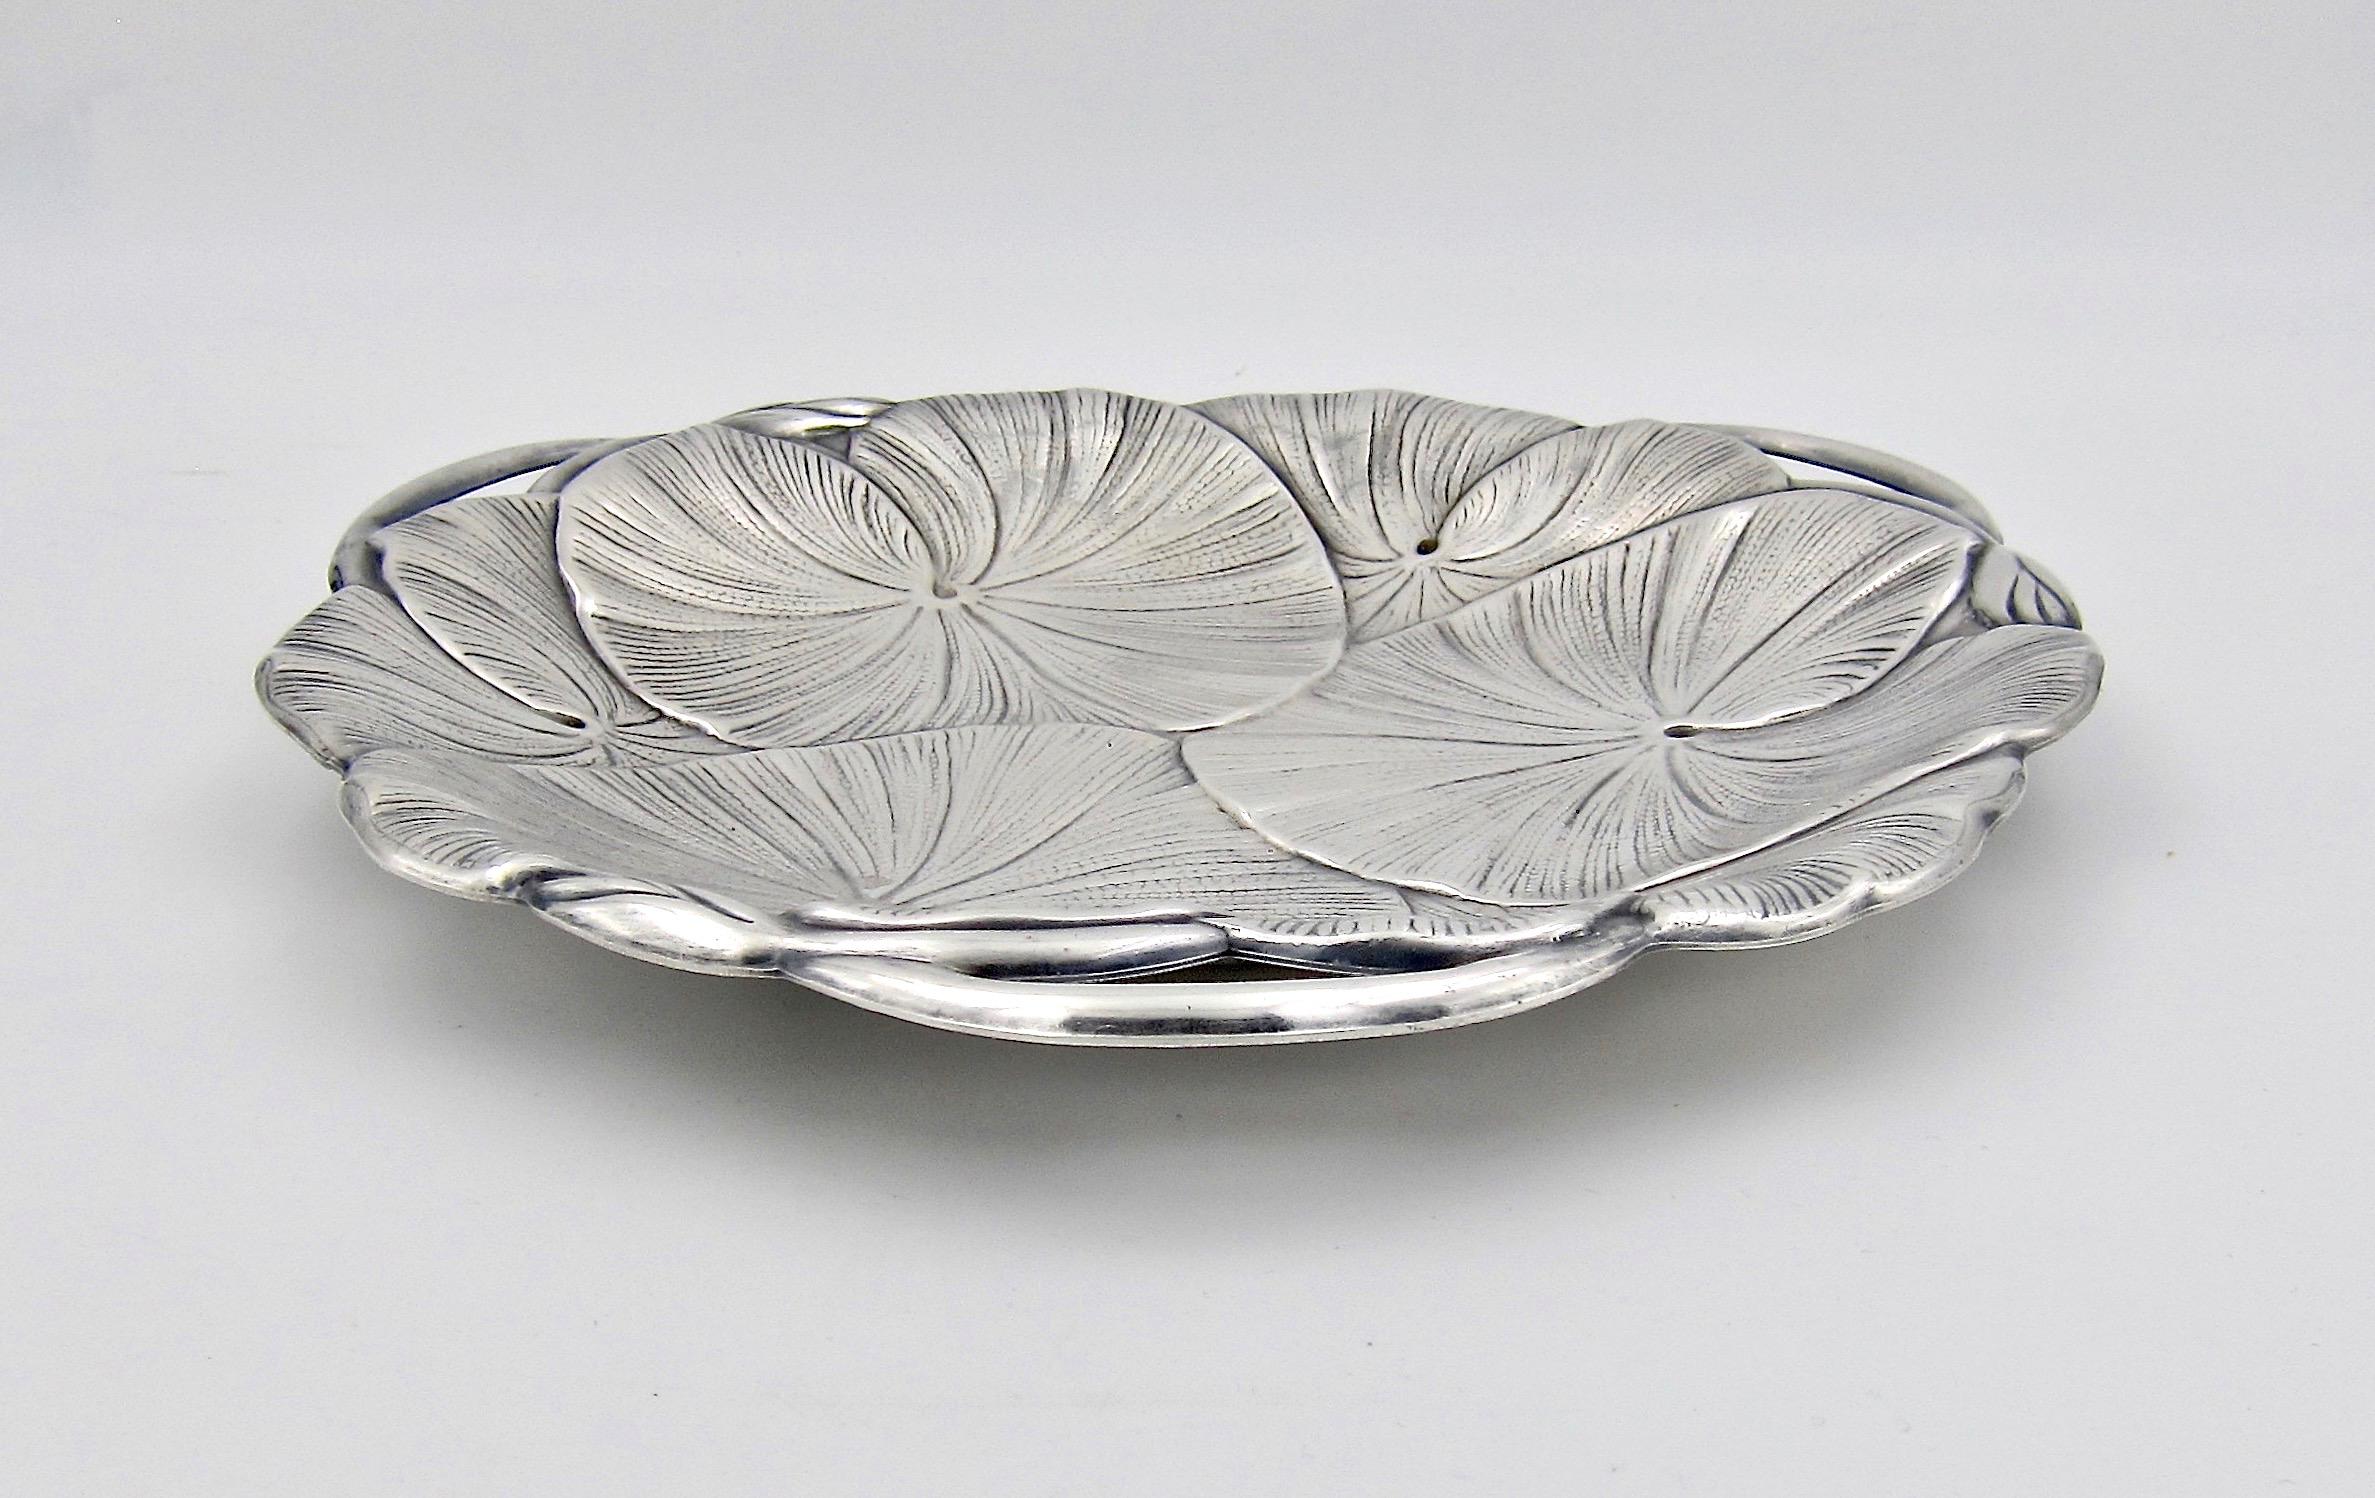 20th Century Art Nouveau Lily Pad Tray with Open Handles in Silver-Plate